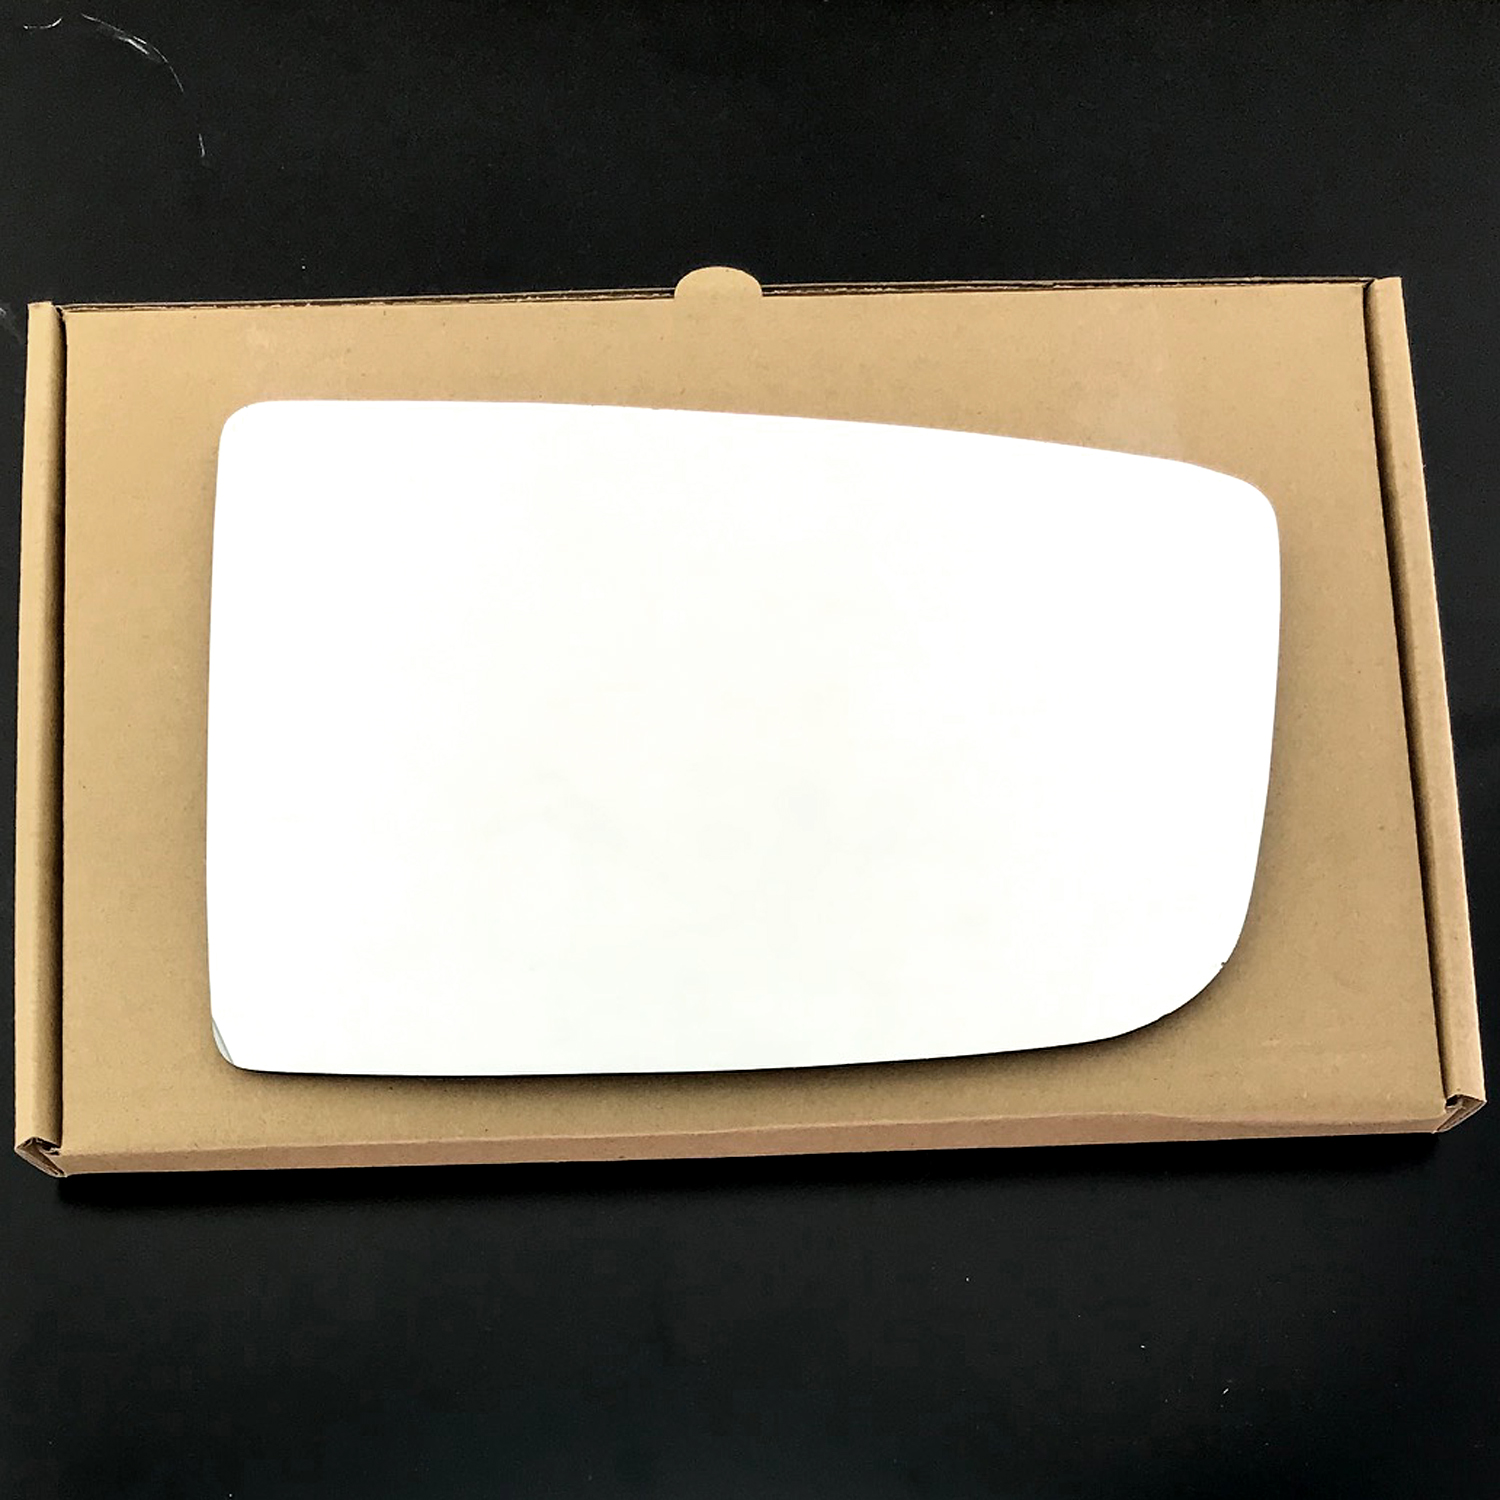 Volkswagen Crafter  Wing Mirror Glass RIGHT HAND ( UK Driver Side ) 2007 to 2016 ( With Indicator ) – Convex Wing Mirror